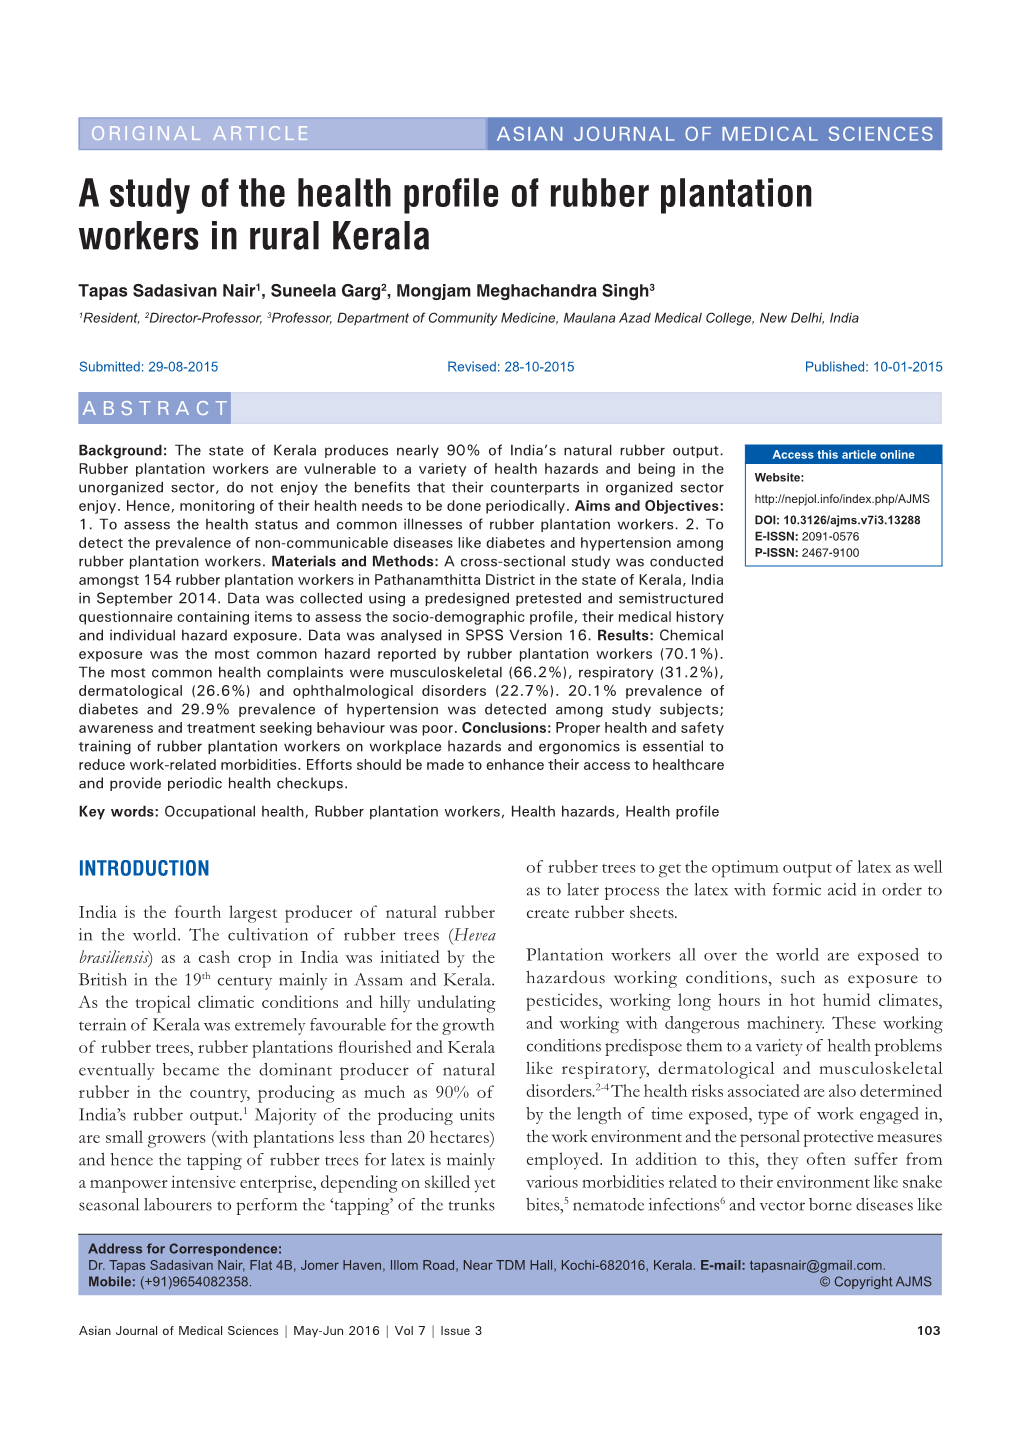 A Study of the Health Profile of Rubber Plantation Workers in Rural Kerala